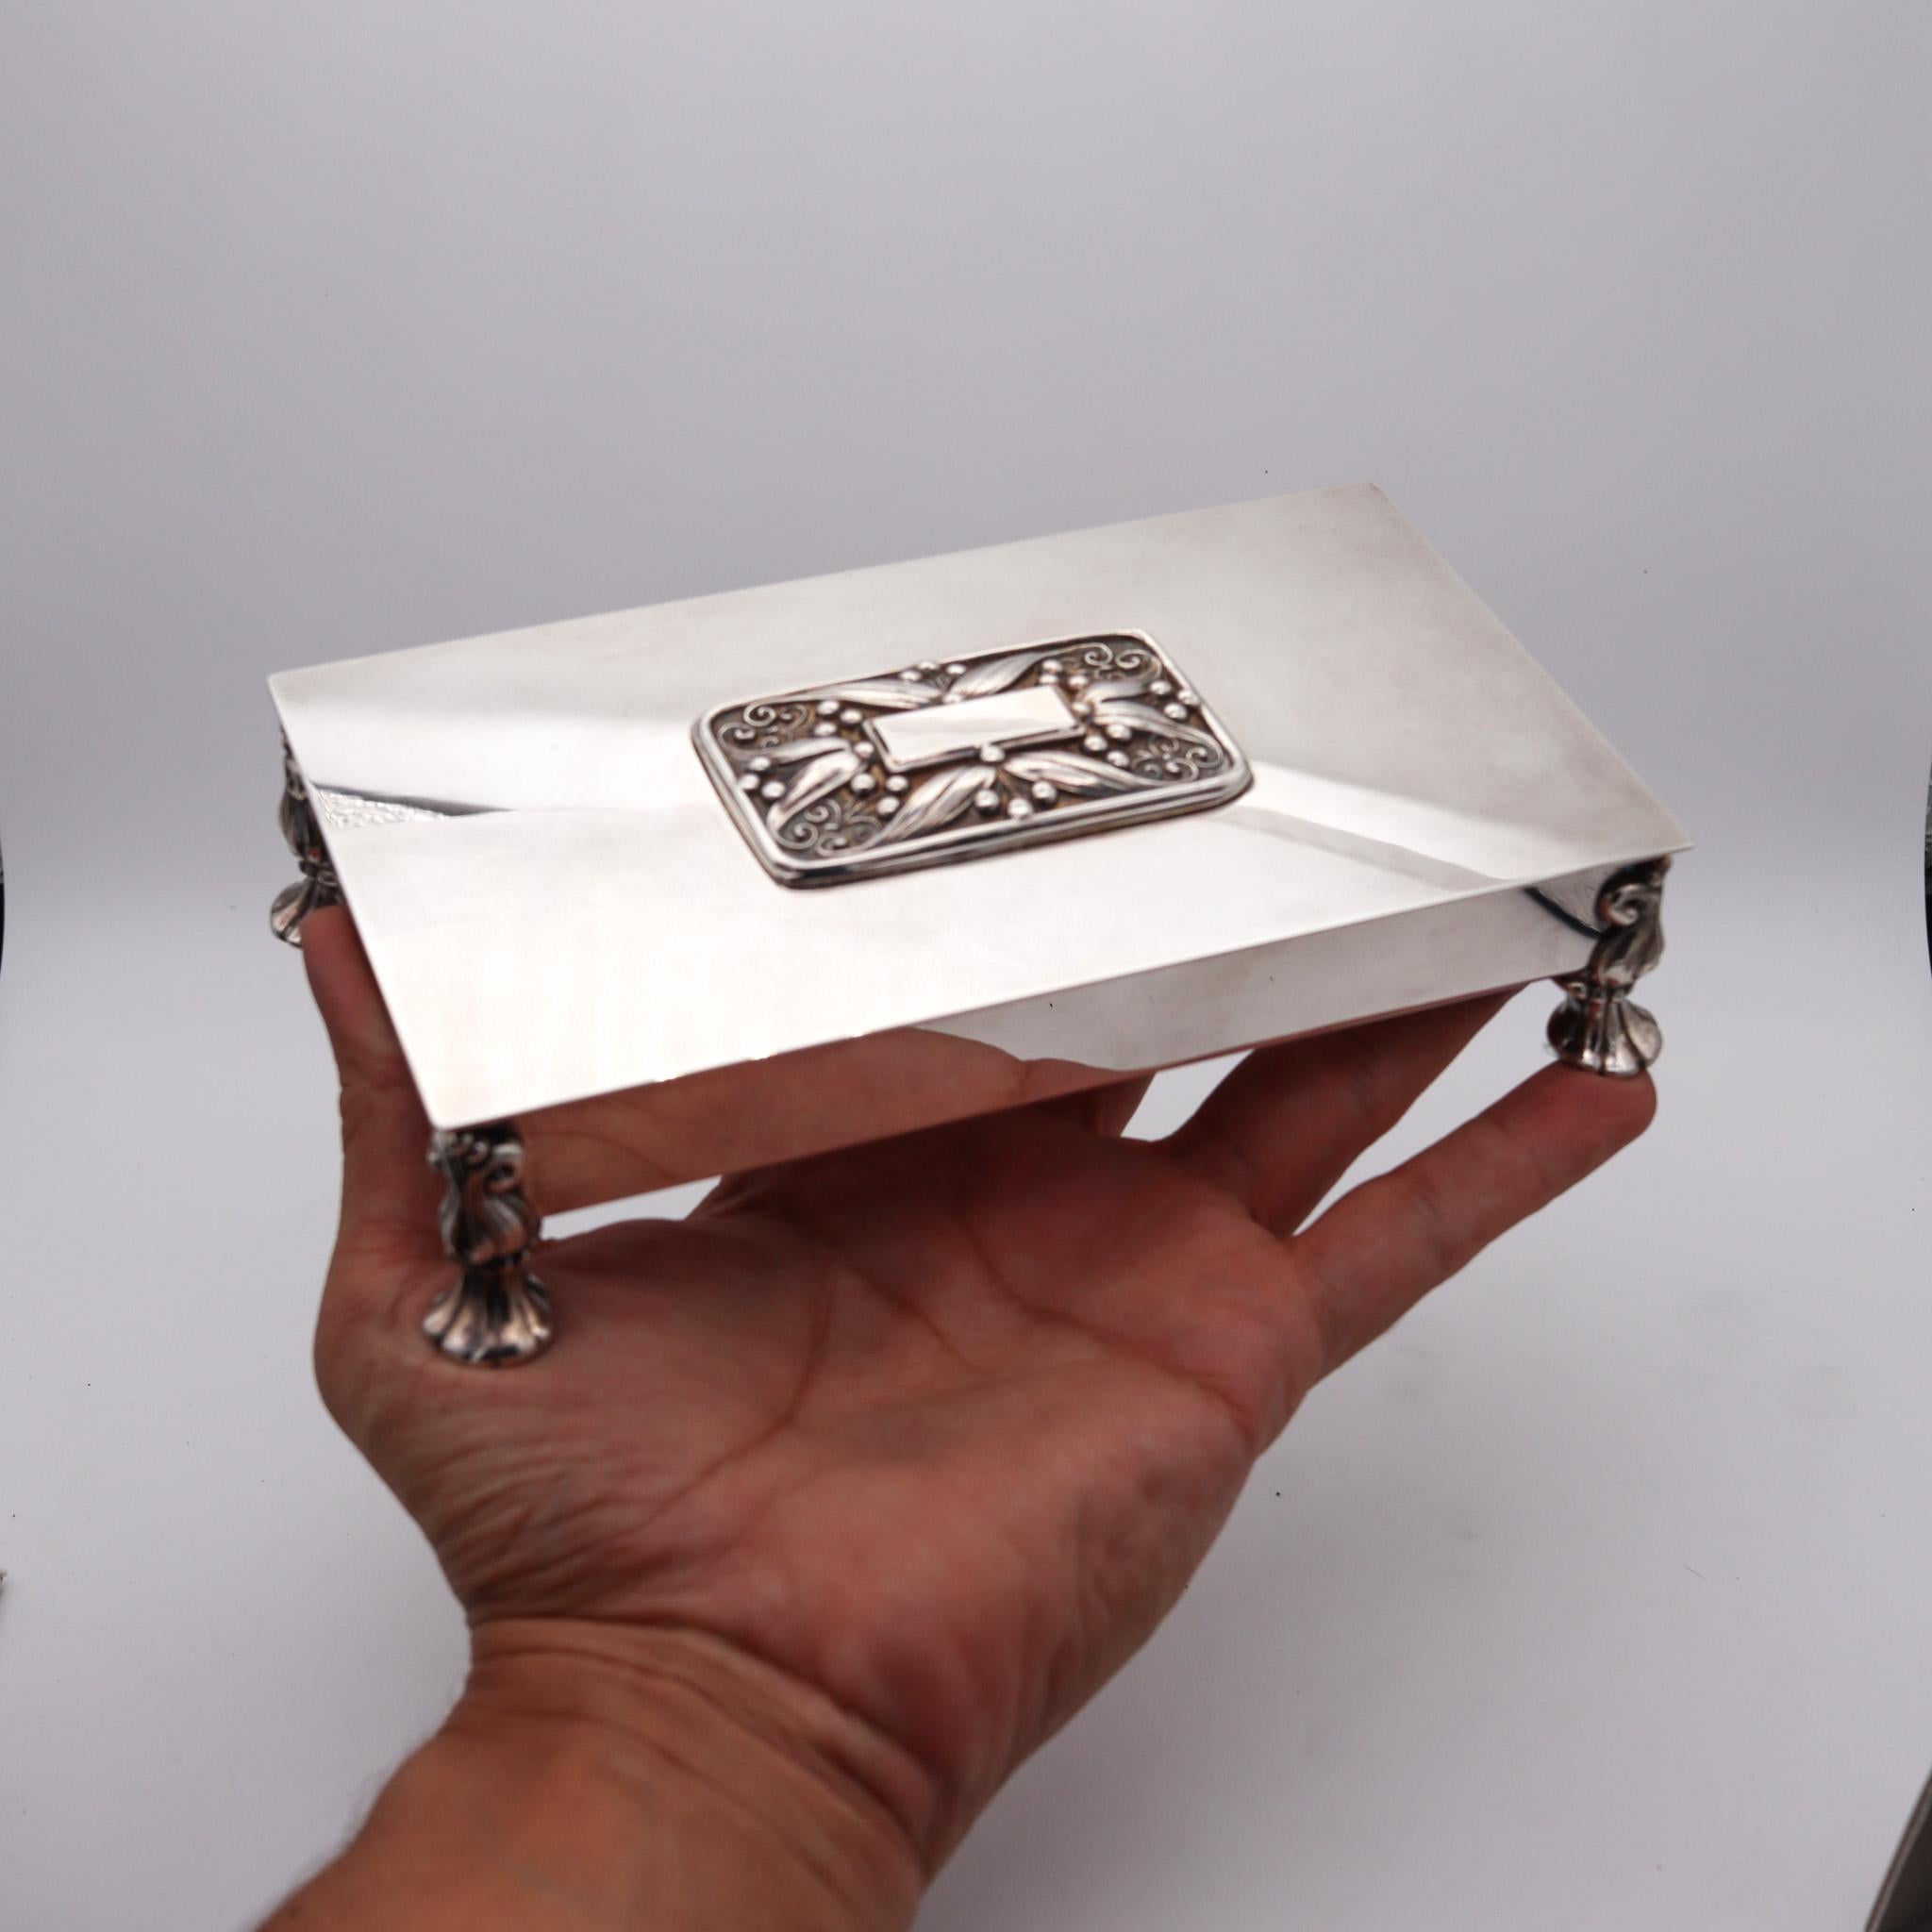 Ronson Art Metal Works 1920 Very Rare Art Deco Sterling Silver Plate Desk Box In Excellent Condition For Sale In Miami, FL